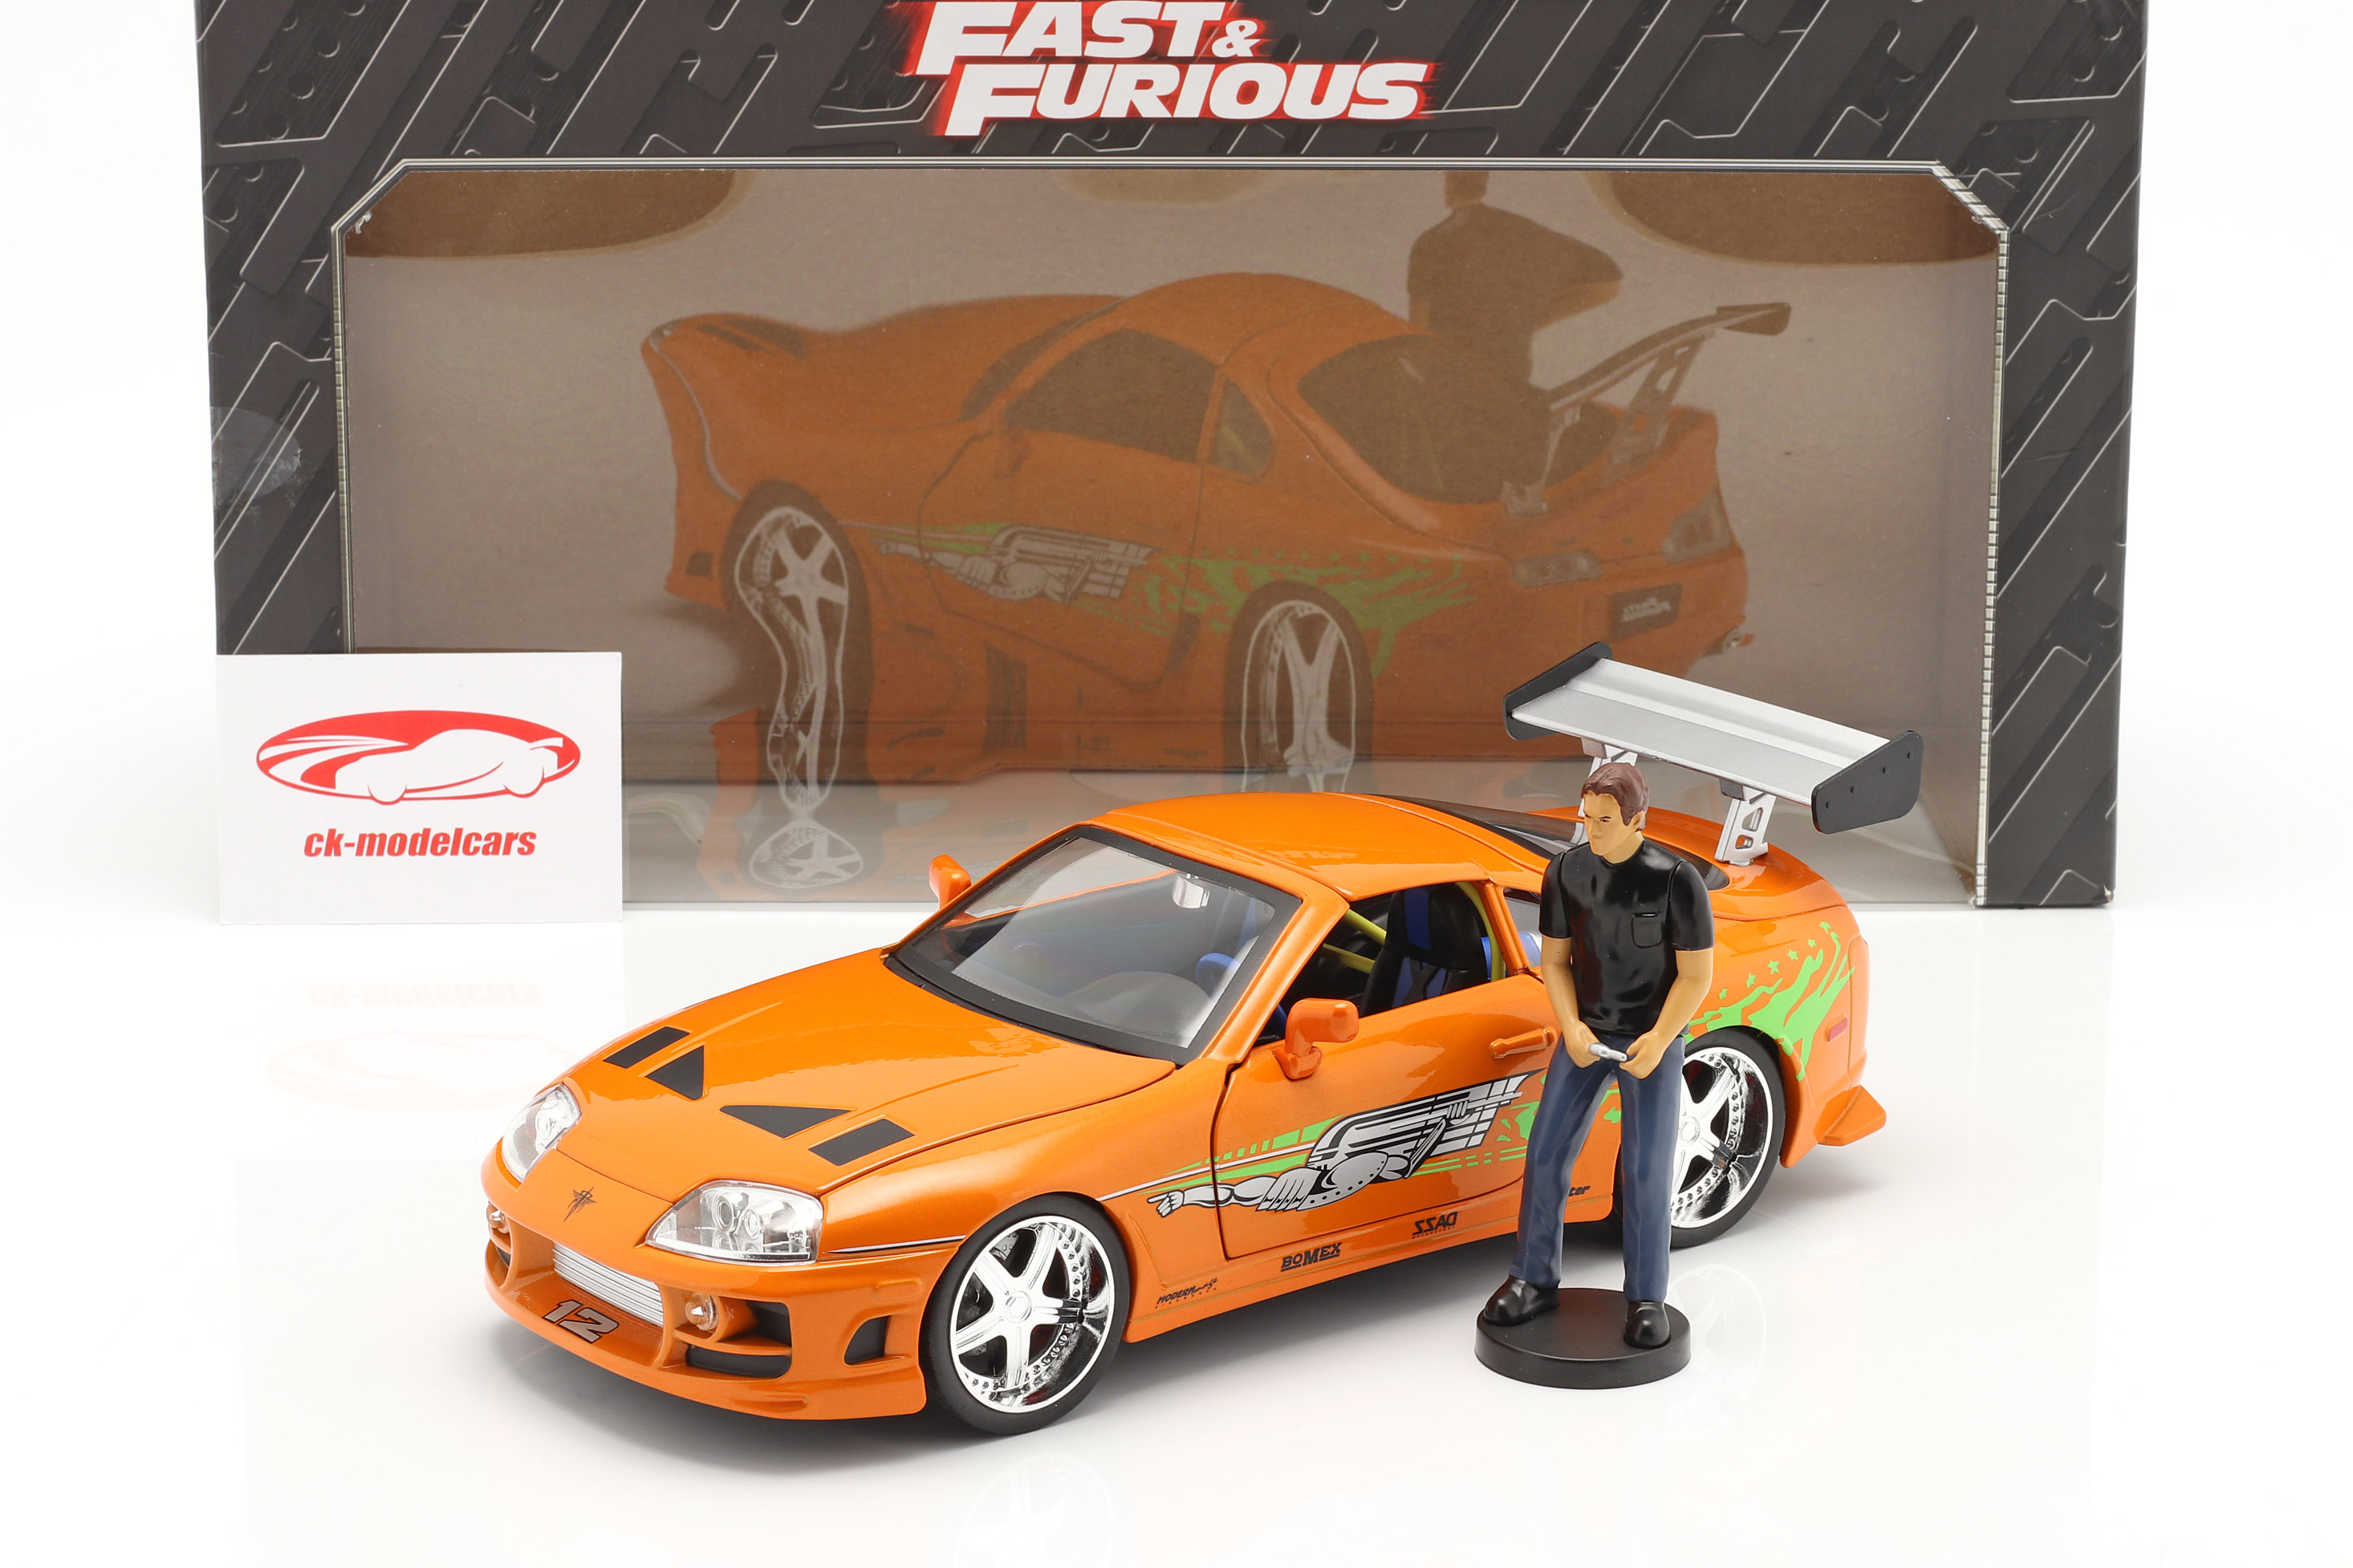 CK-Modelcars - The Fast and The Furious. Original model cars.